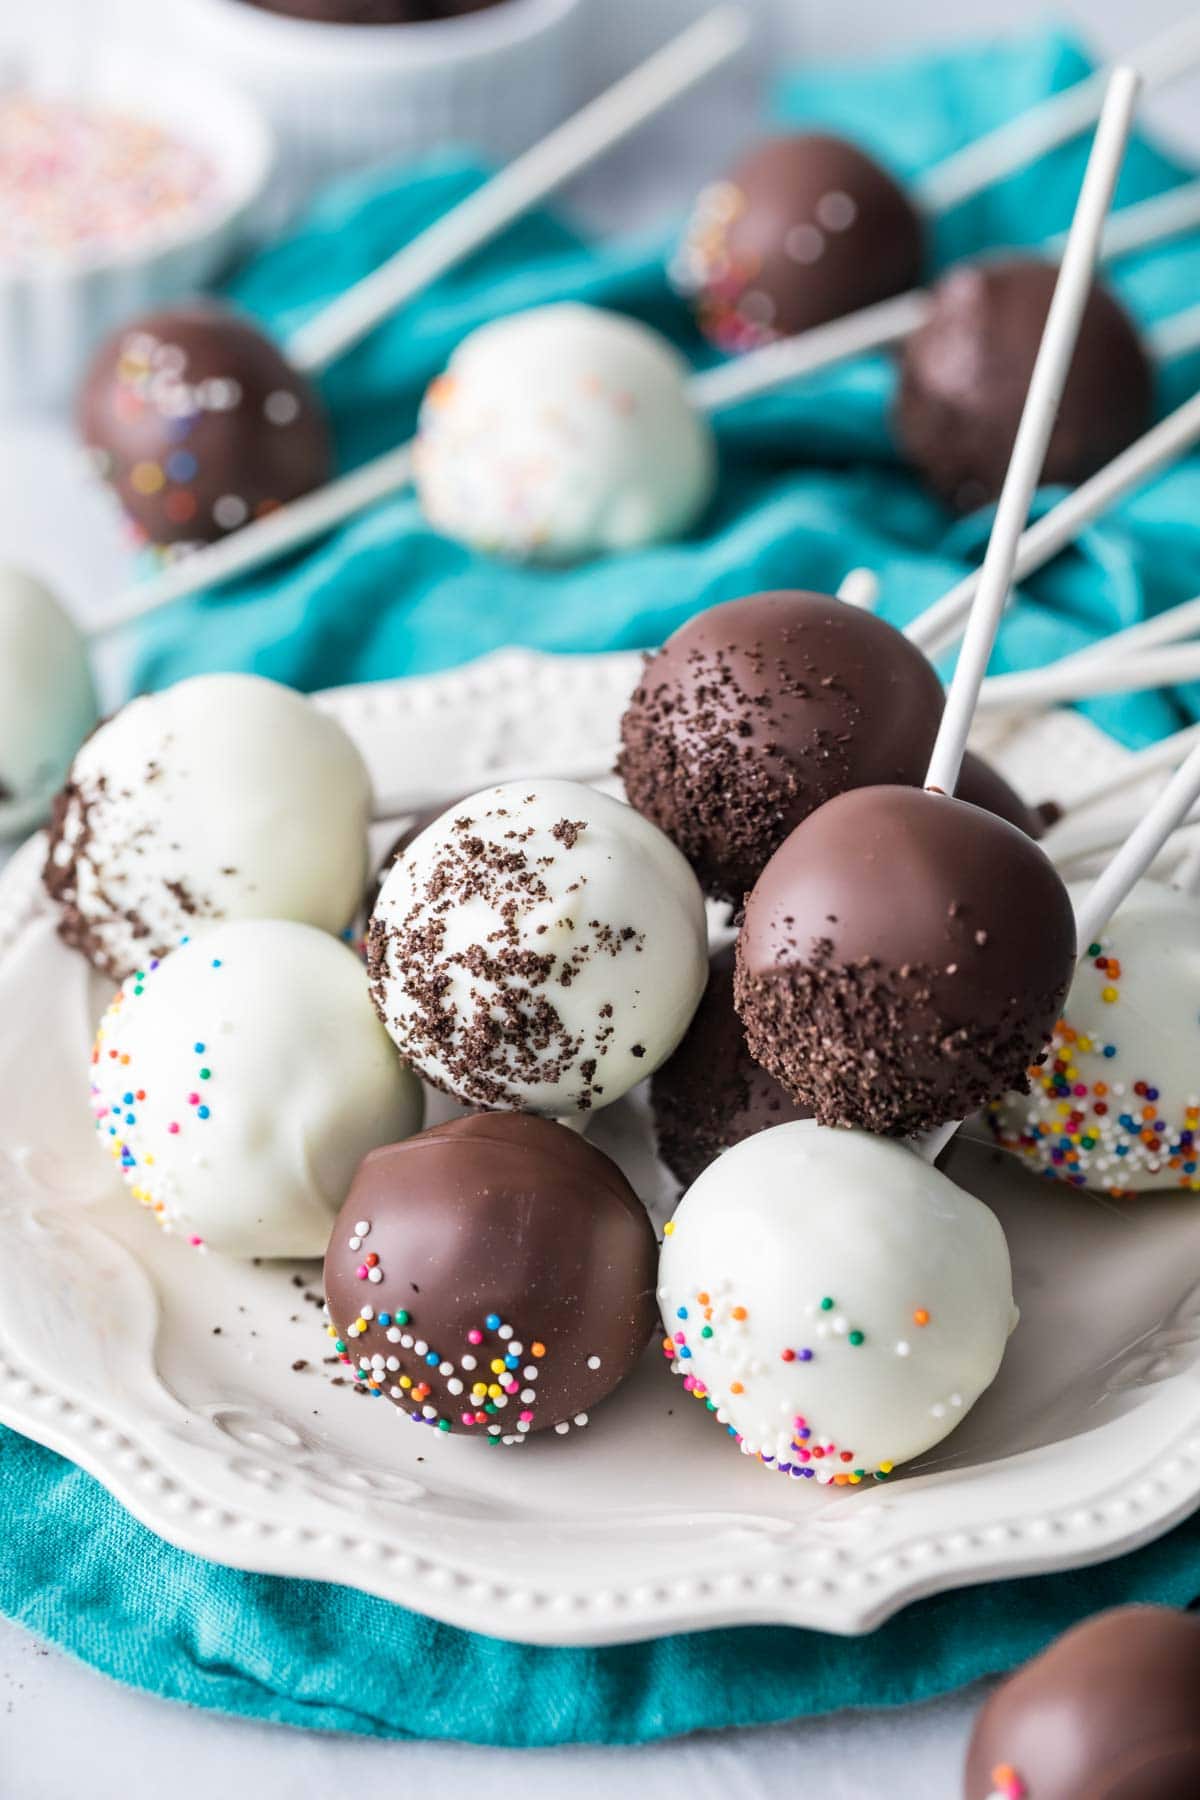 Cake pops coated in white and dark chocolate on a plate.